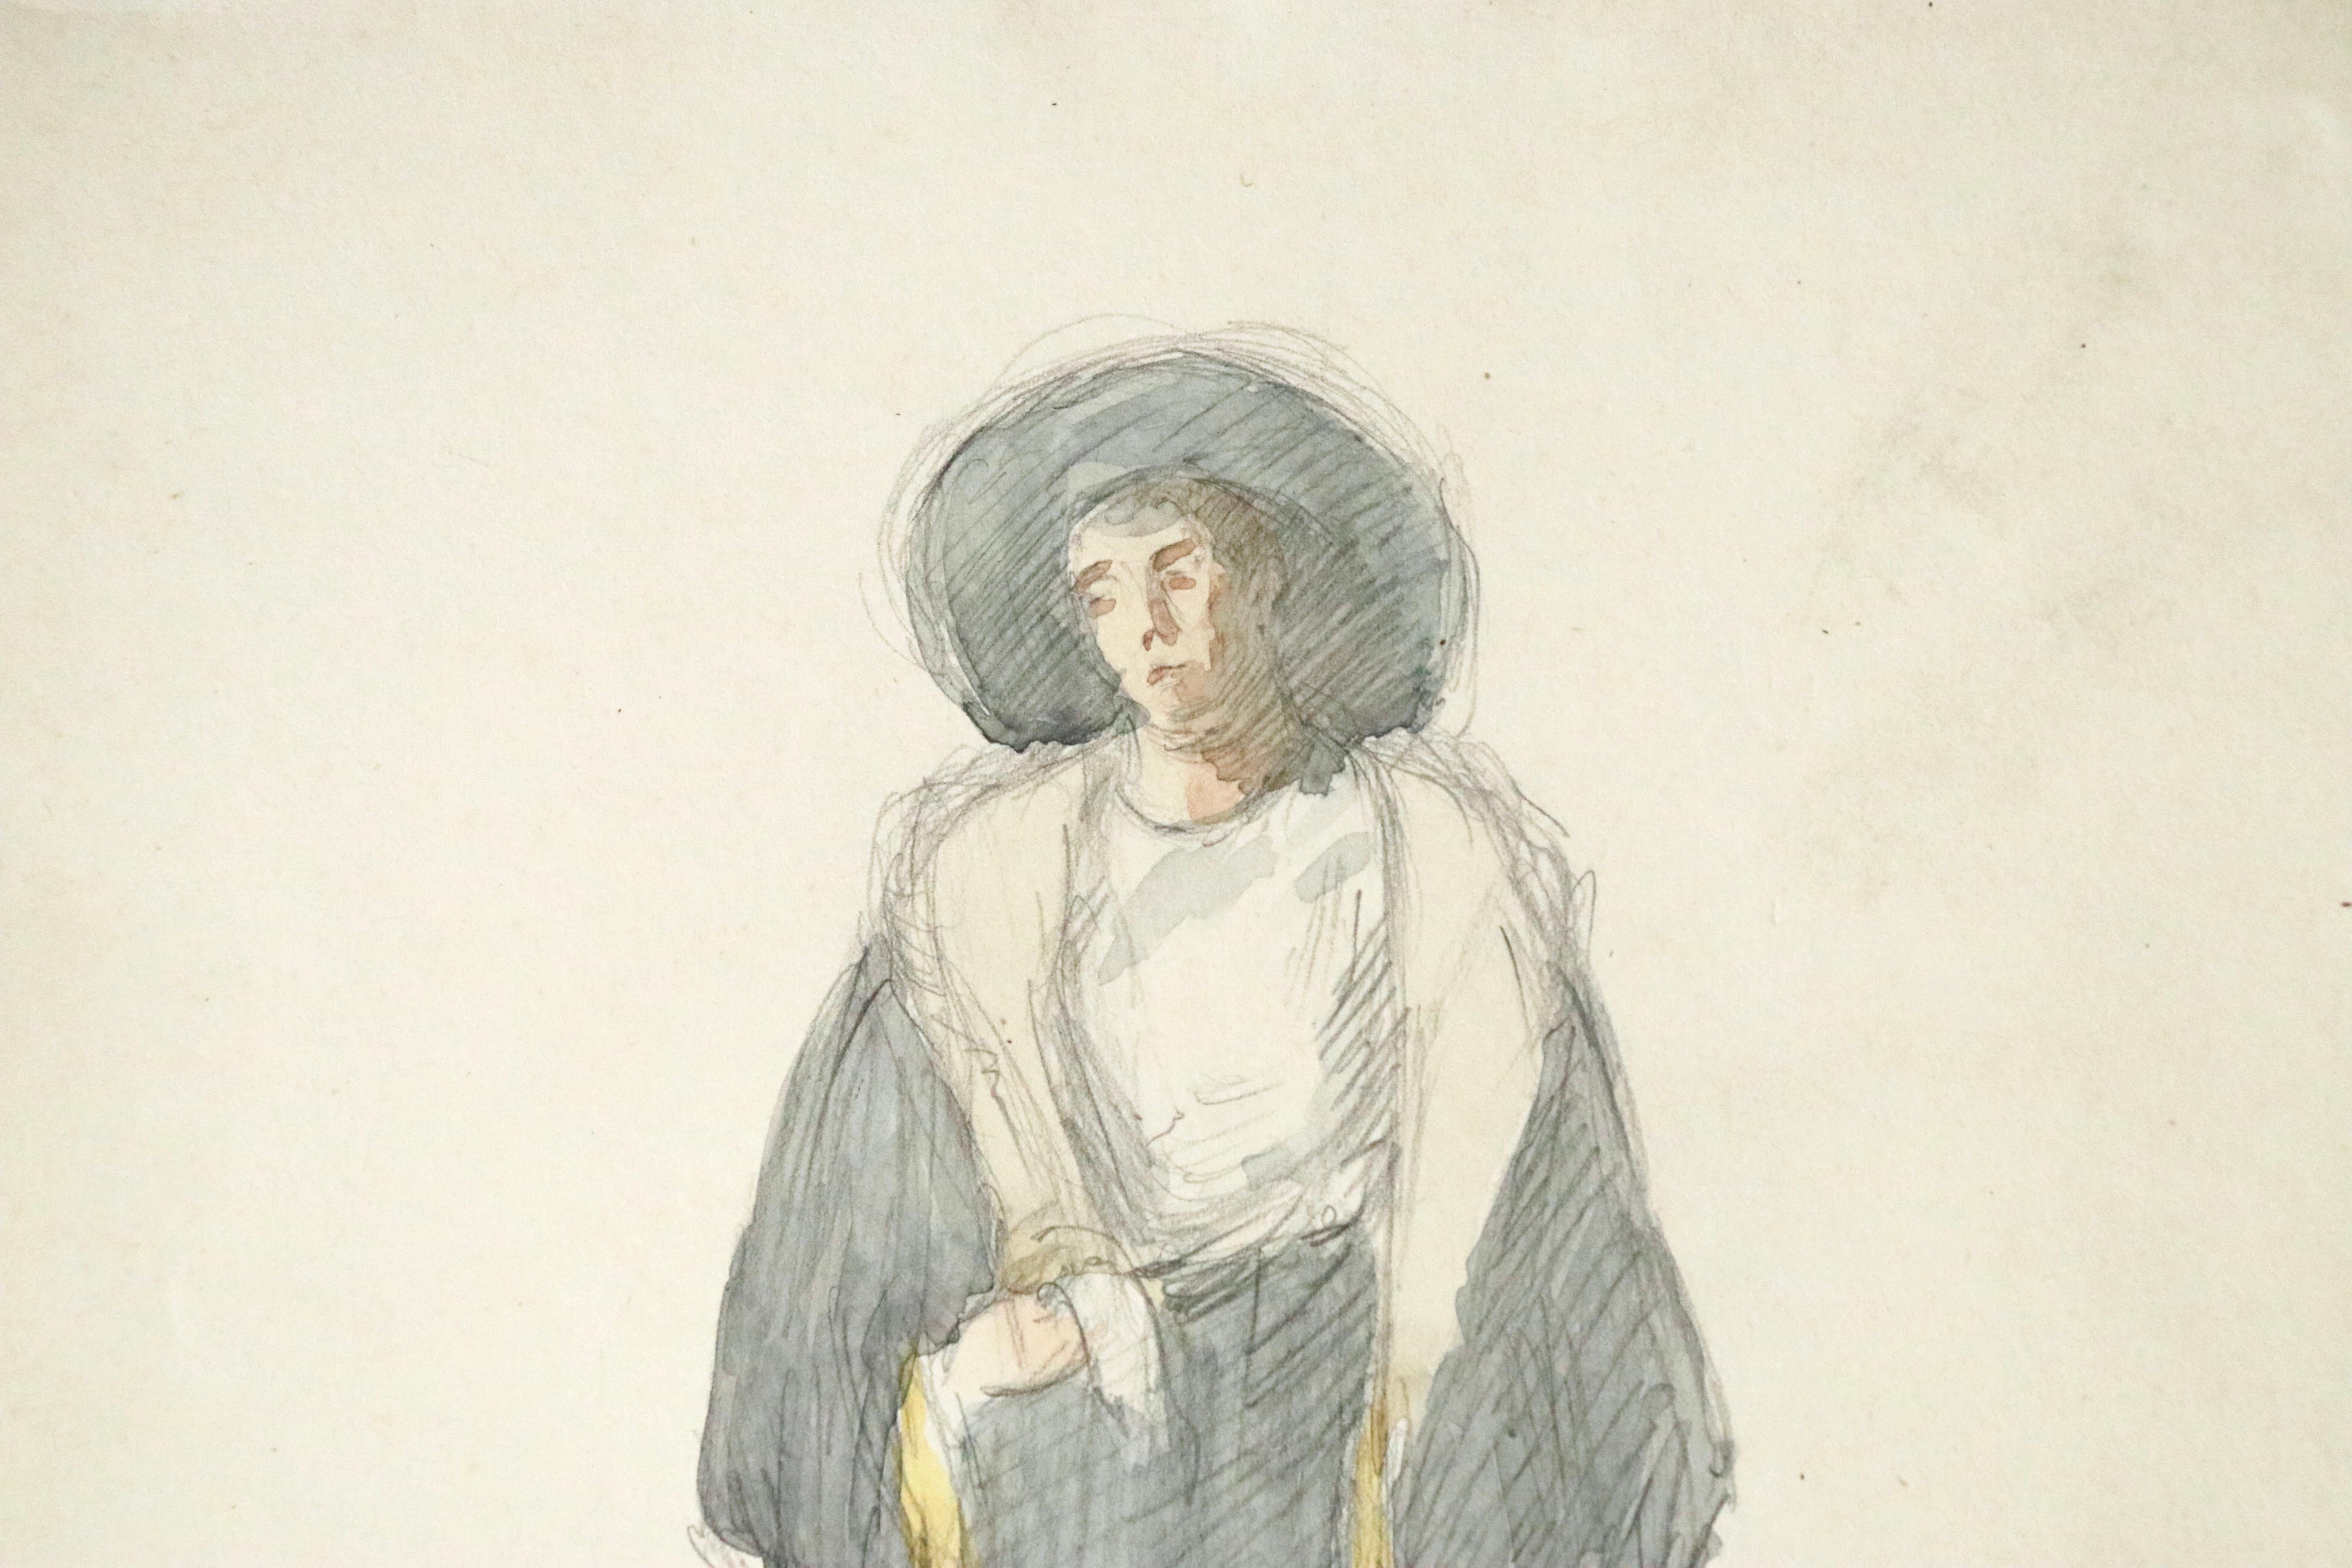 A full length portrait of Marie Duhem by her husband Henri. Watercolour on paper circa 1910. Signed lower right. This painting is not currently framed but a suitable frame can be sourced if required.

Descendant of an old Flemish family, Henri Duhem